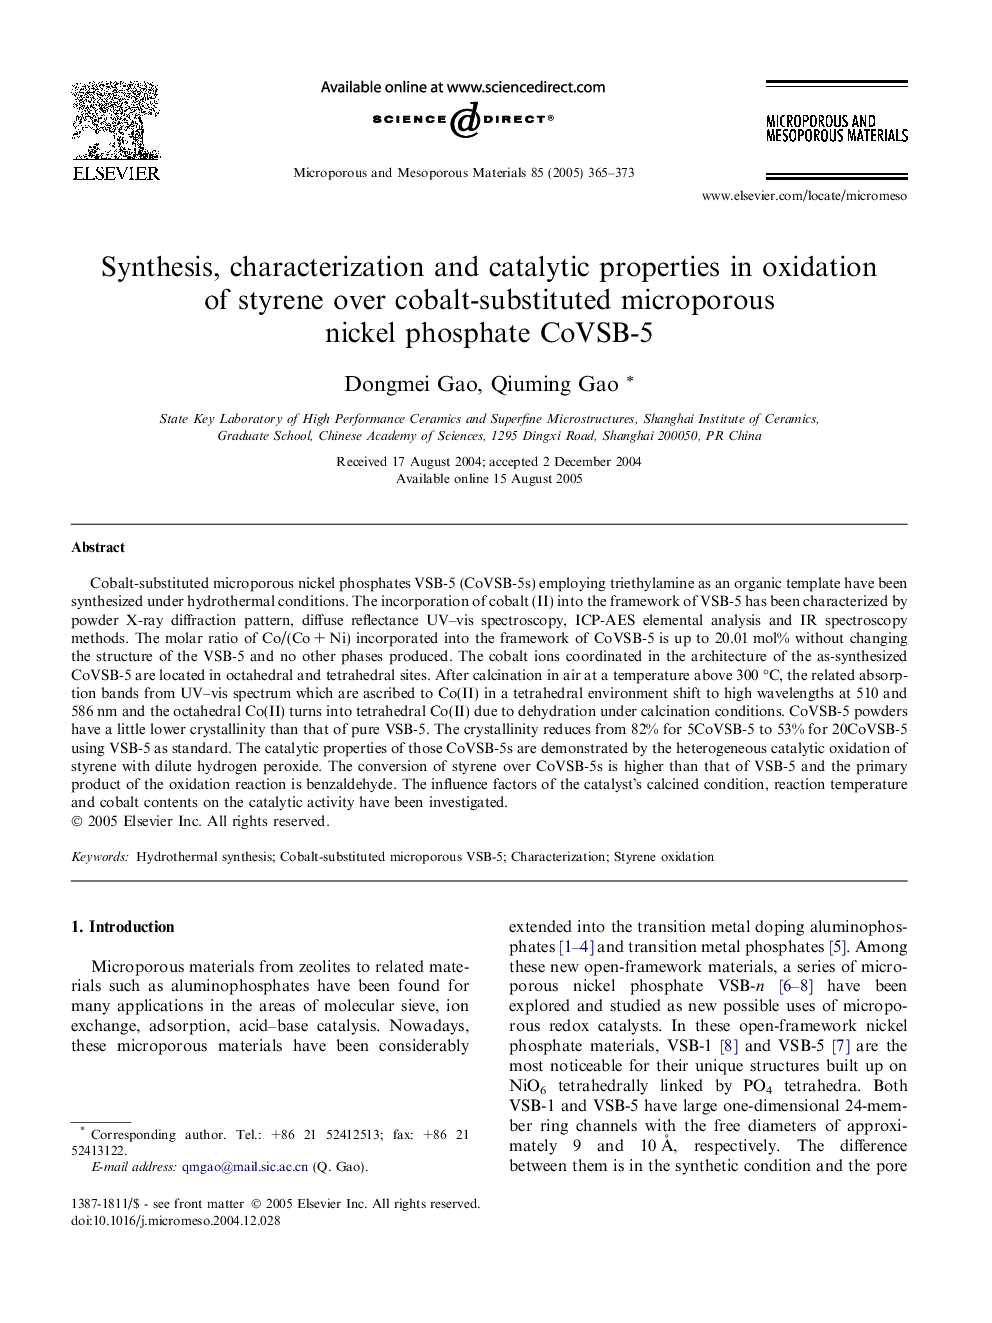 Synthesis, characterization and catalytic properties in oxidation of styrene over cobalt-substituted microporous nickel phosphate CoVSB-5